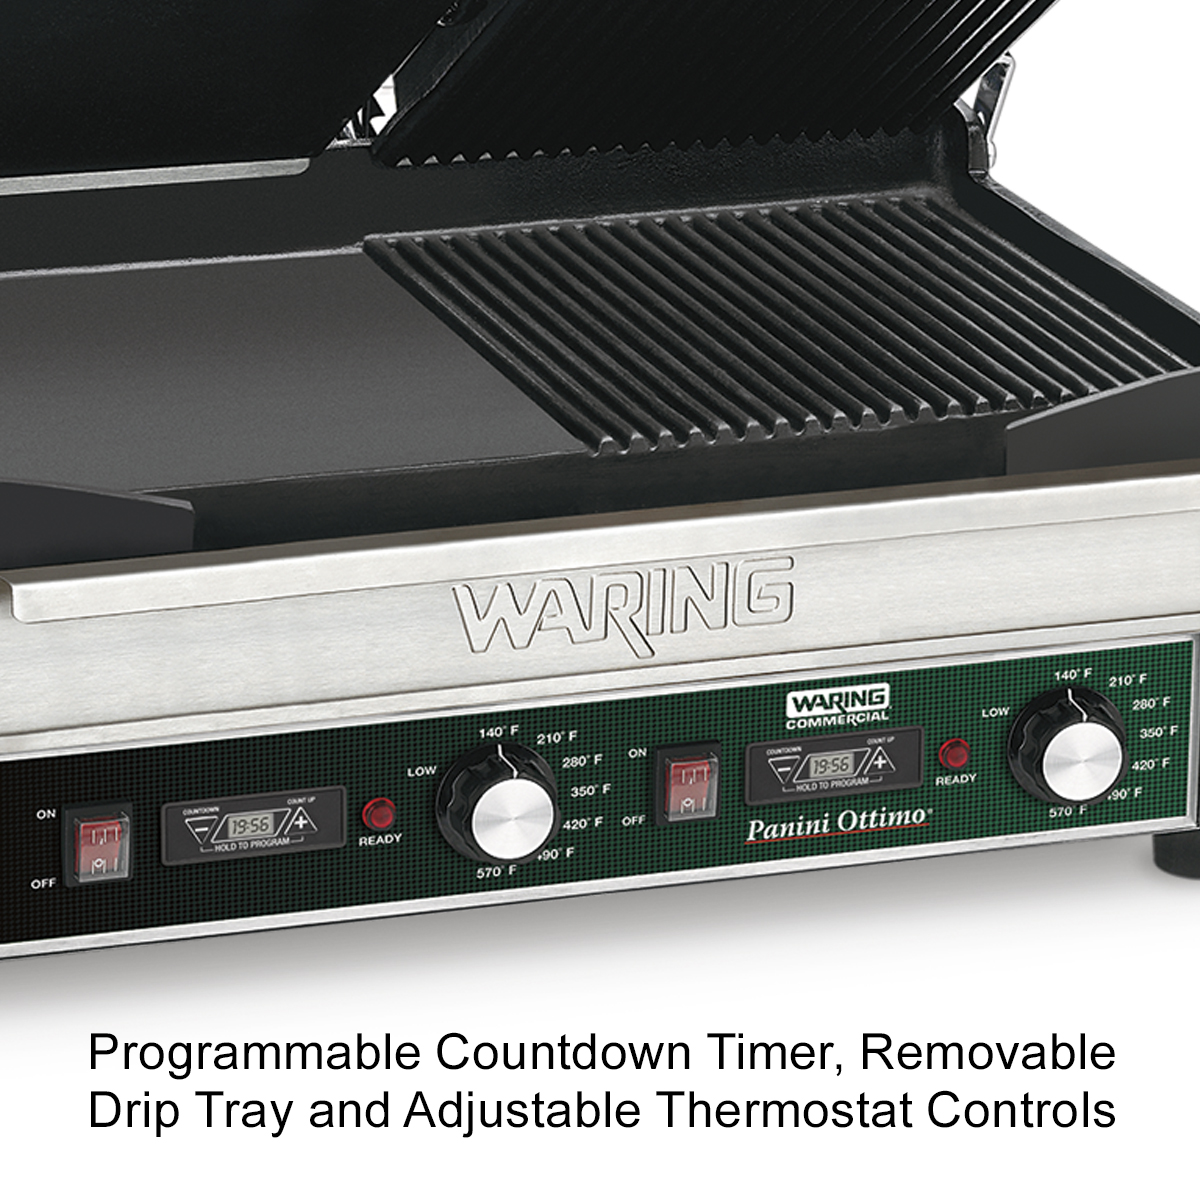 https://www.waringcommercialproducts.com/files/products/wdg300t-double-panini-flat-grill-with-timer-inset3.jpg